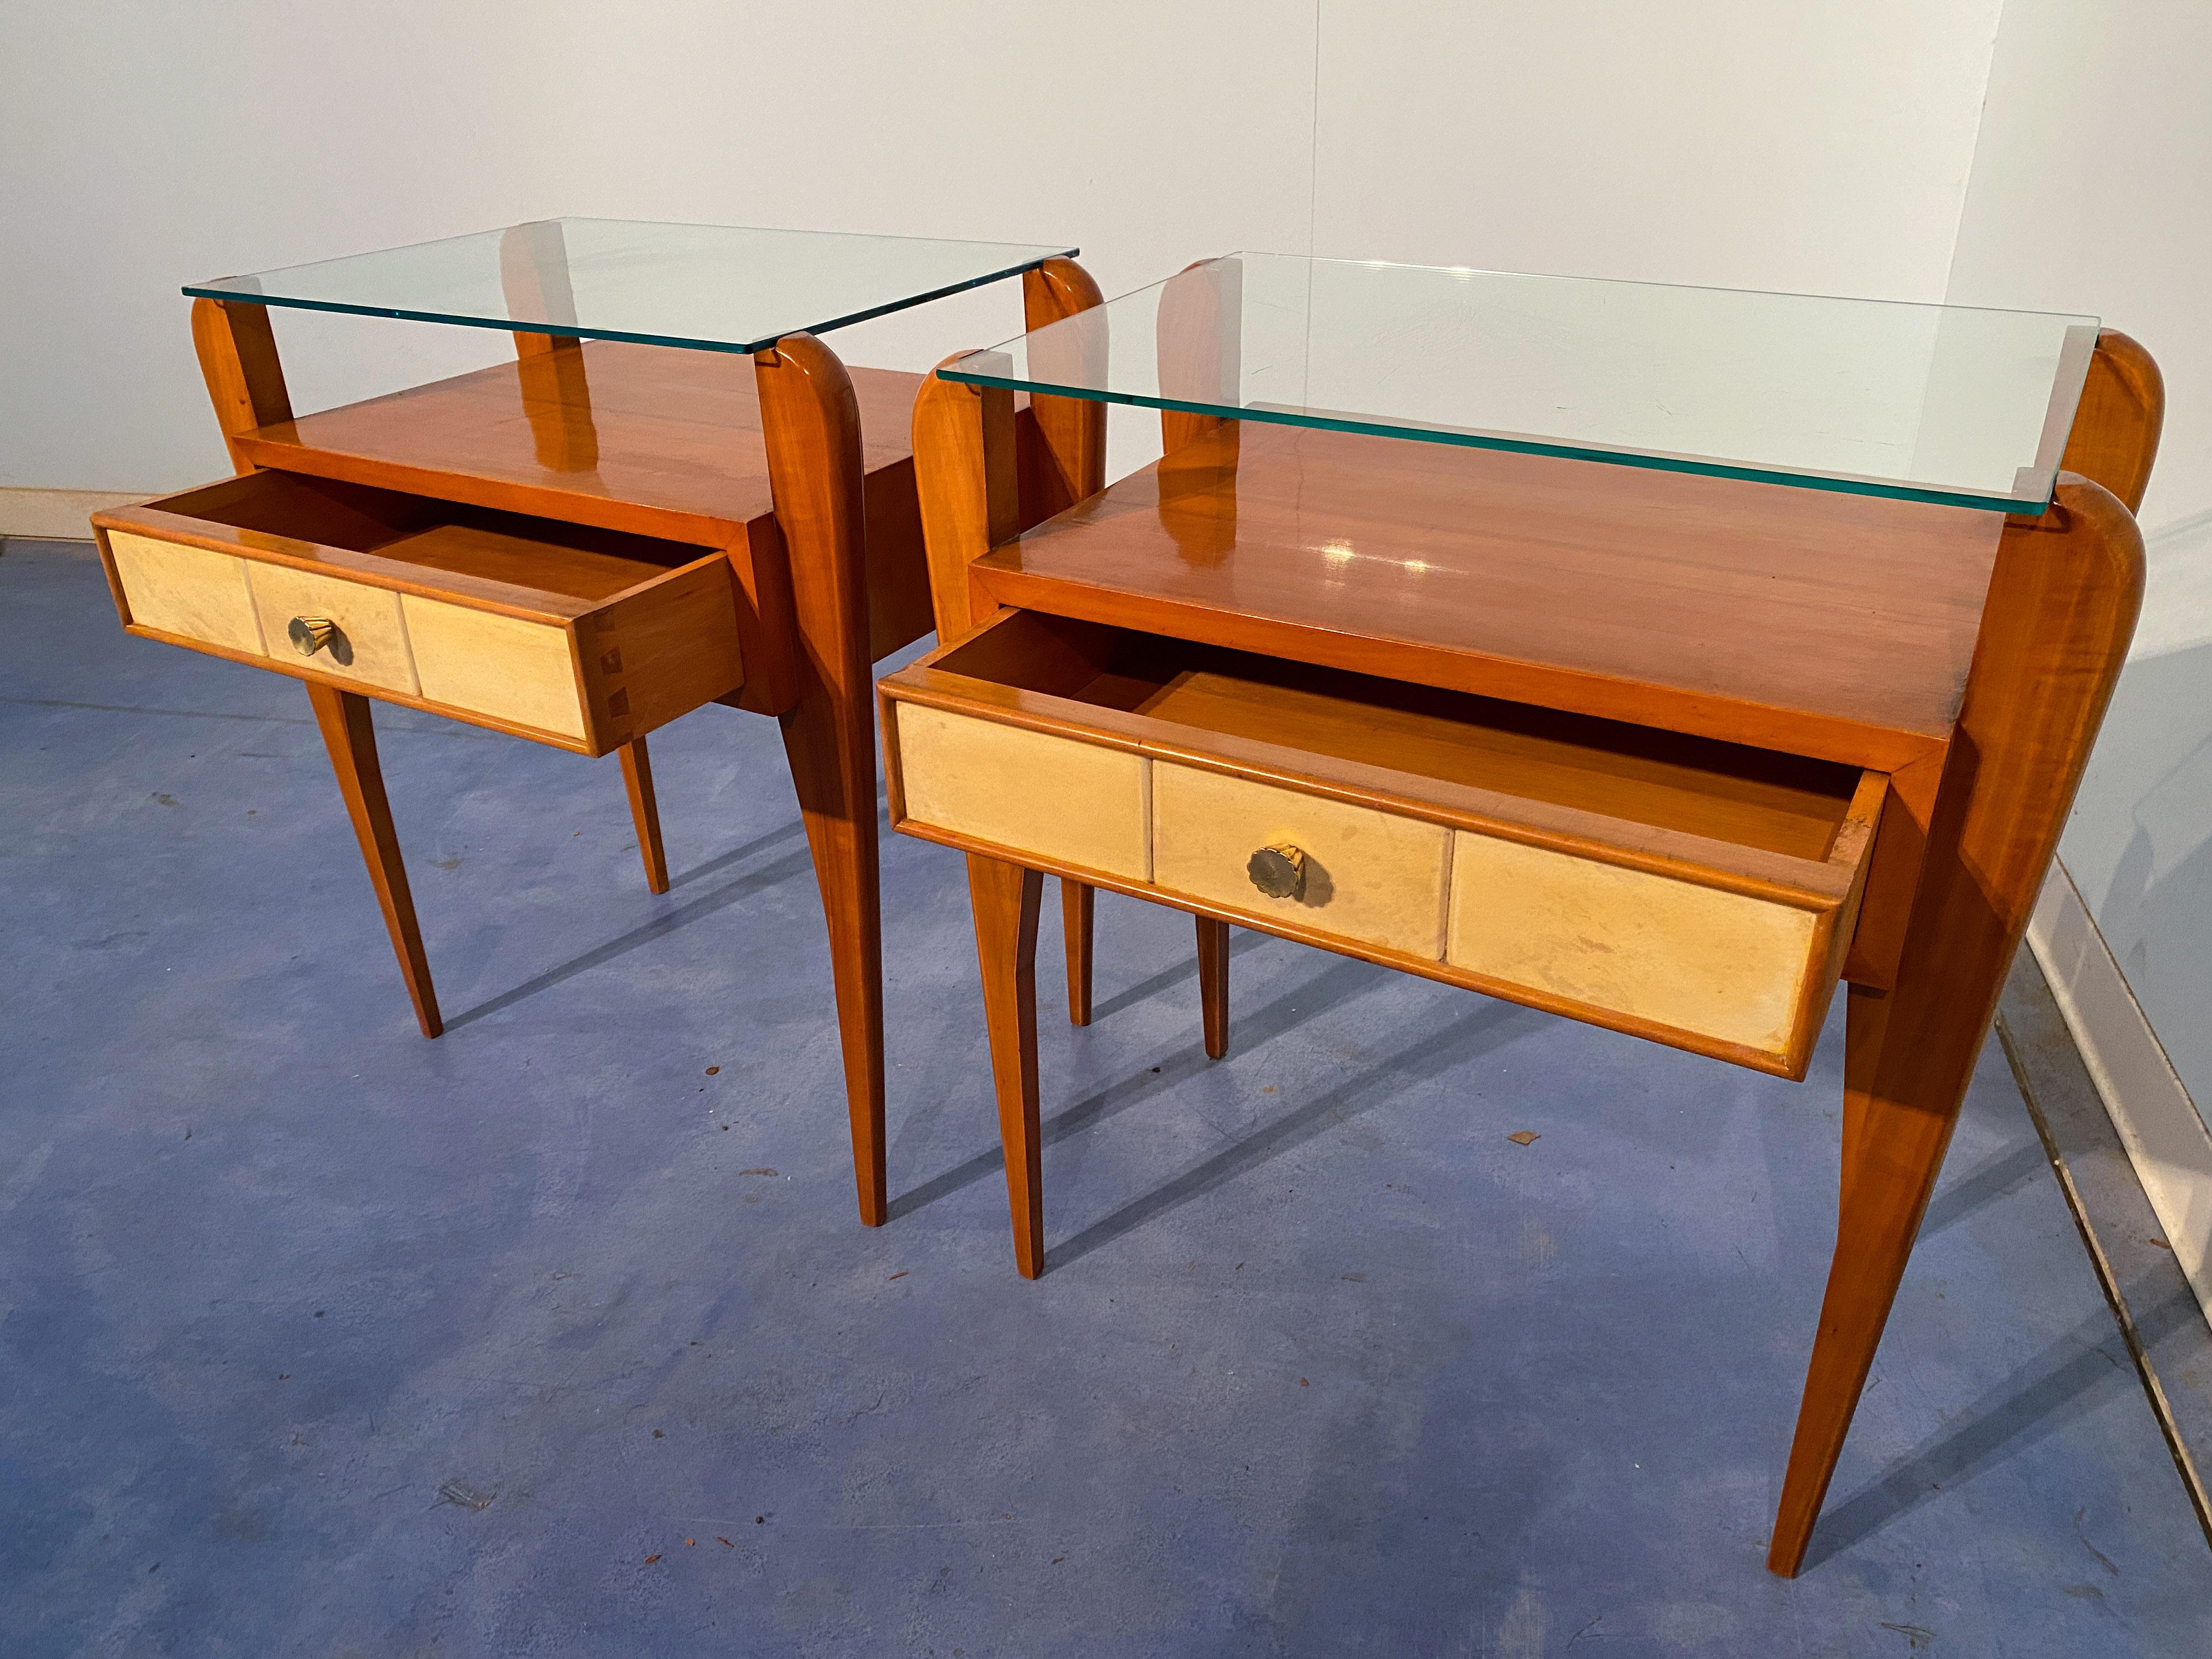 Italian Mid-Century Parchment Bedside or Nightstands by Osvaldo Borsani, 1950 For Sale 6